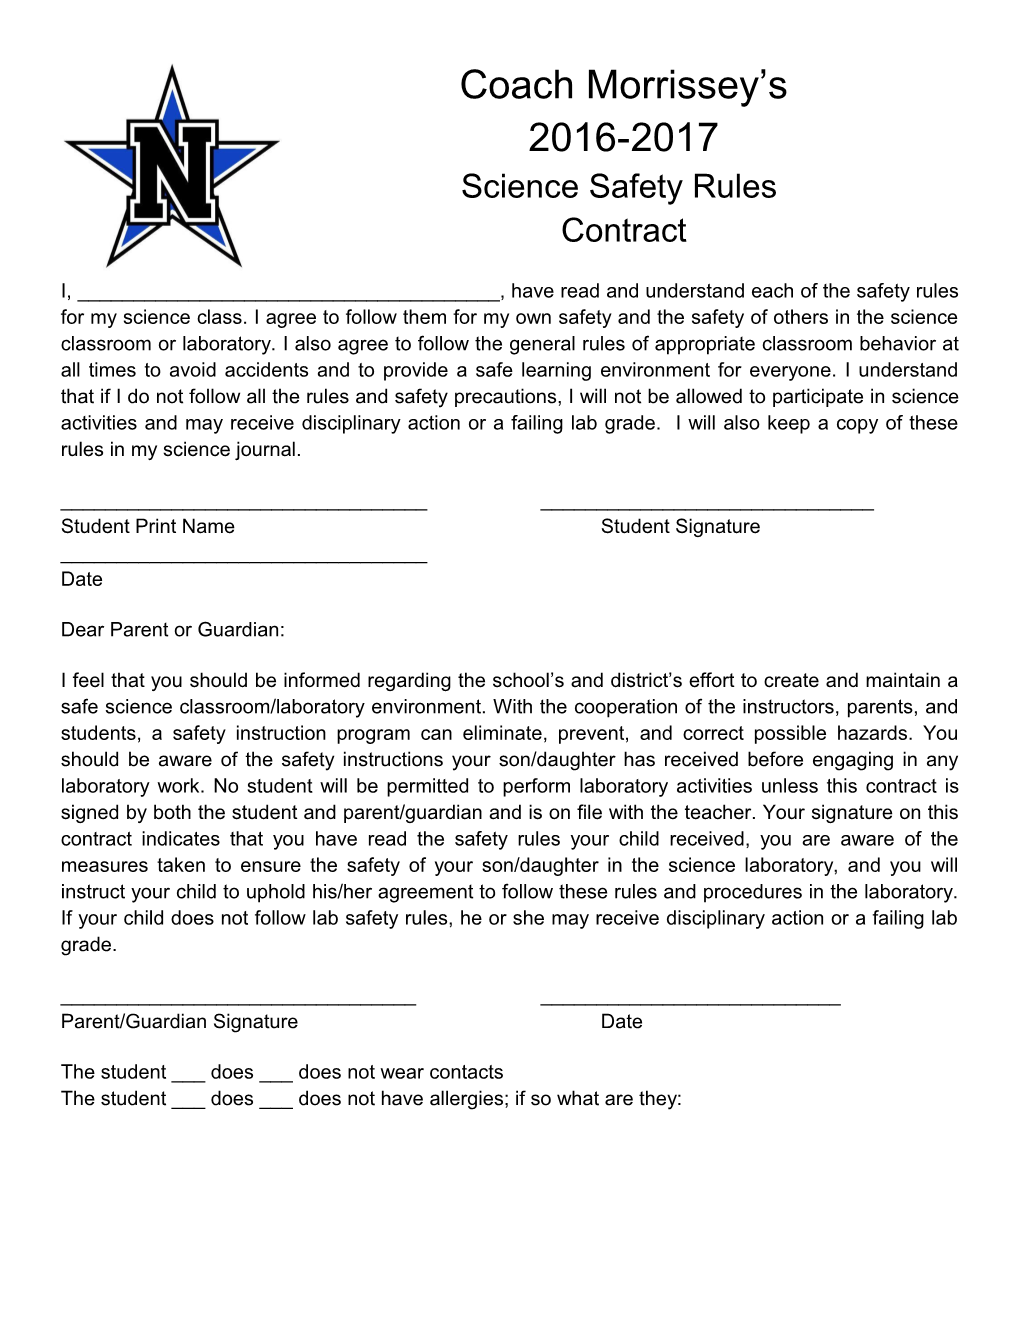 Science Safety Rules s1